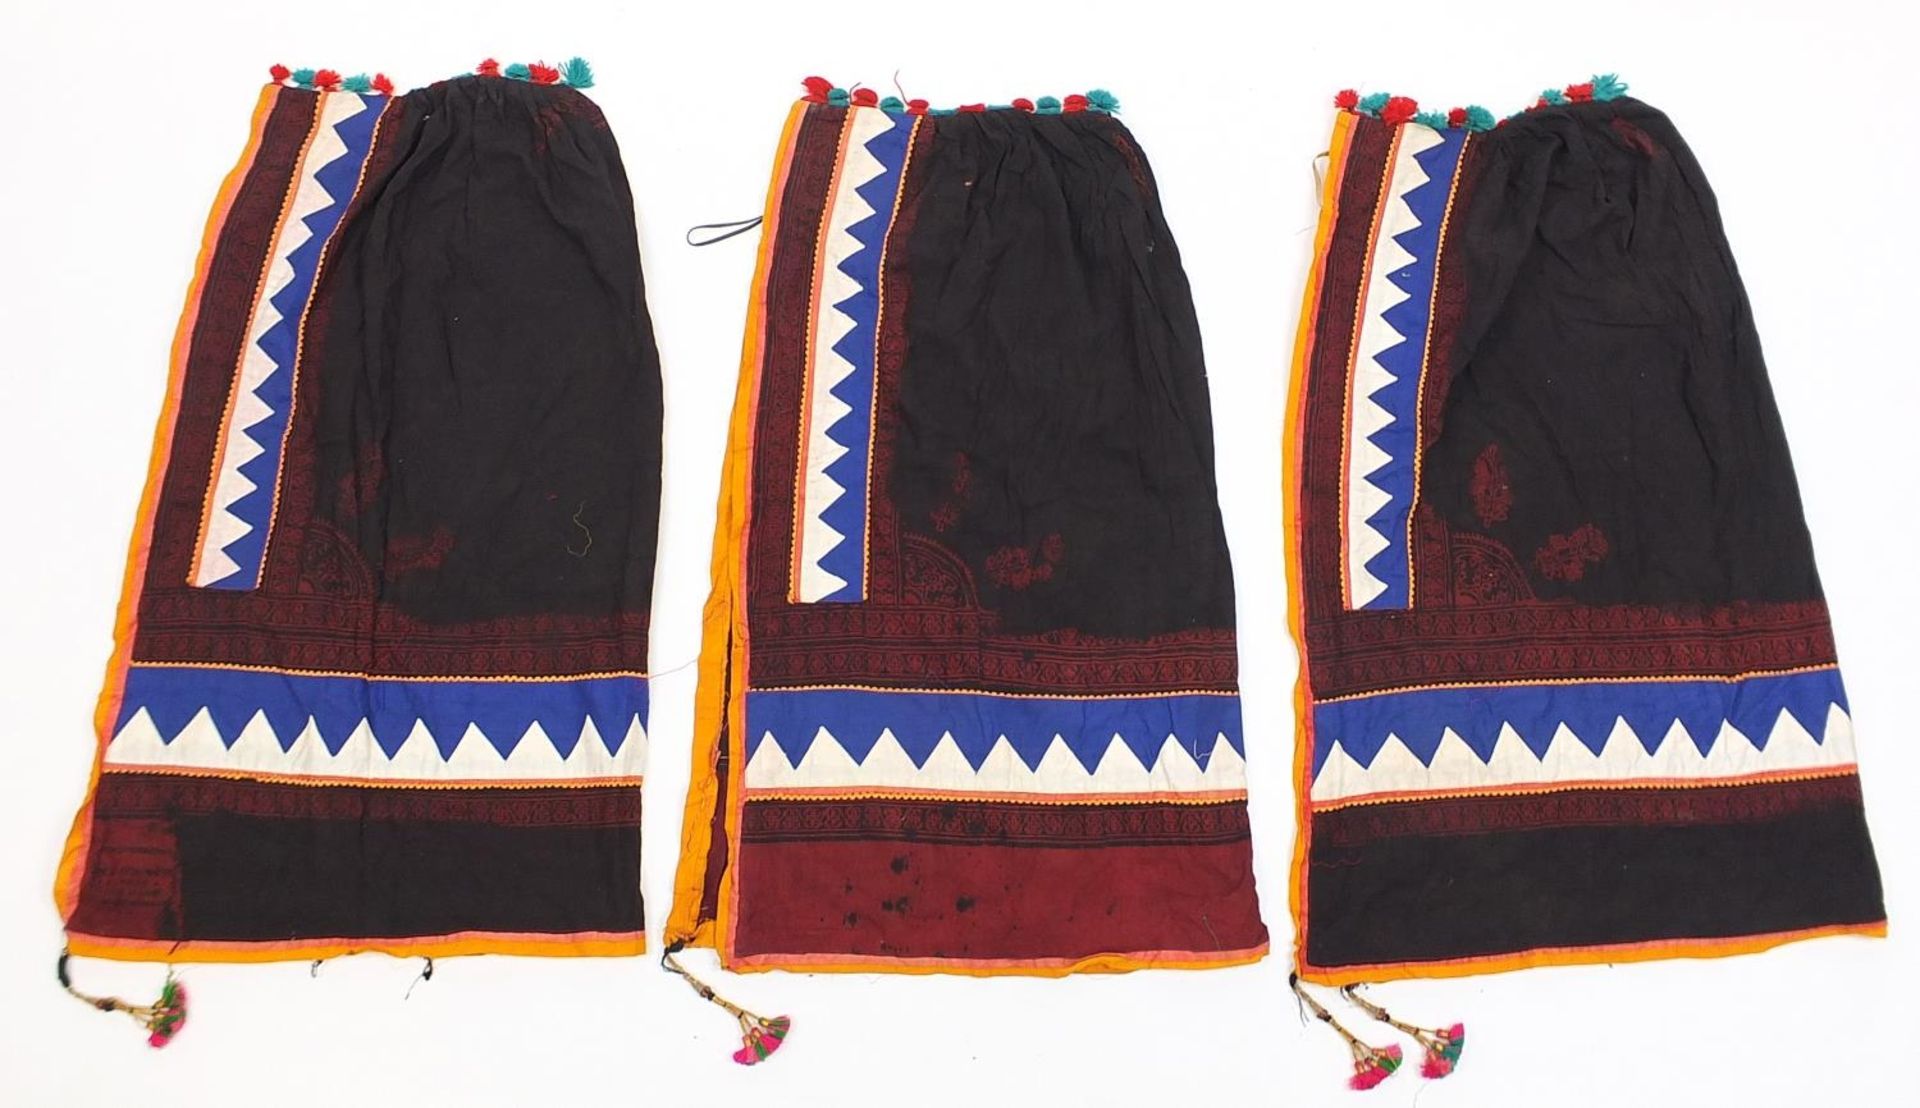 Three Middle Eastern or Indian textiles, possibly cloaks, each approximately 95cm high